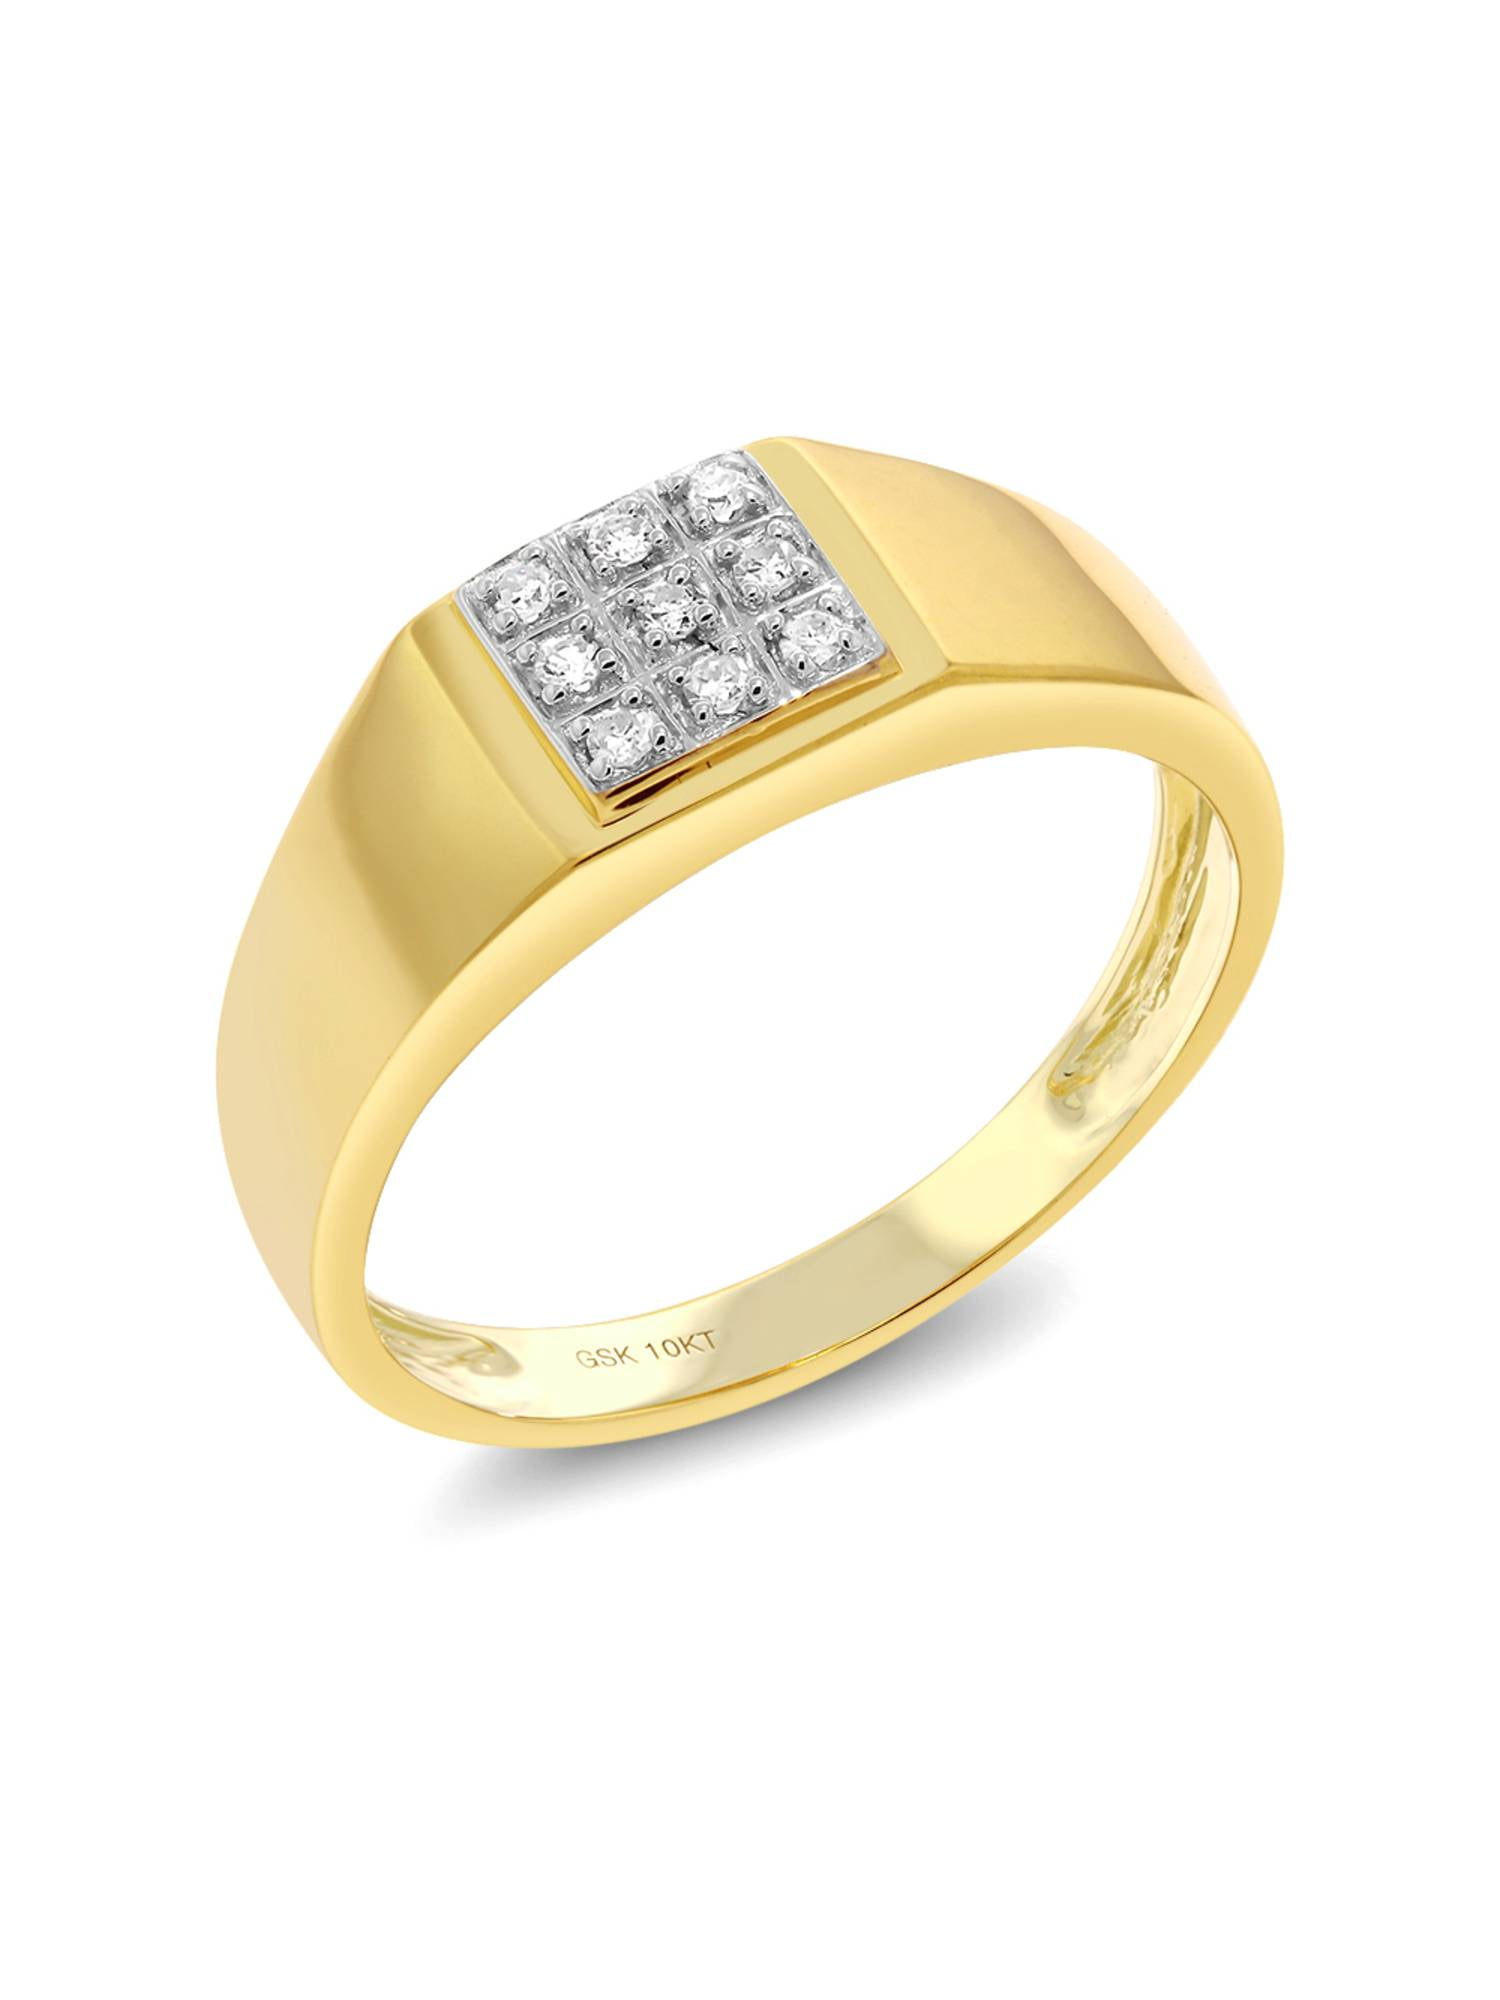 9ct Yellow Gold 0.50ct 9 Stone Fancy Link Gents Diamond Ring | Men diamond  ring, Unique diamond rings, Stone rings for men